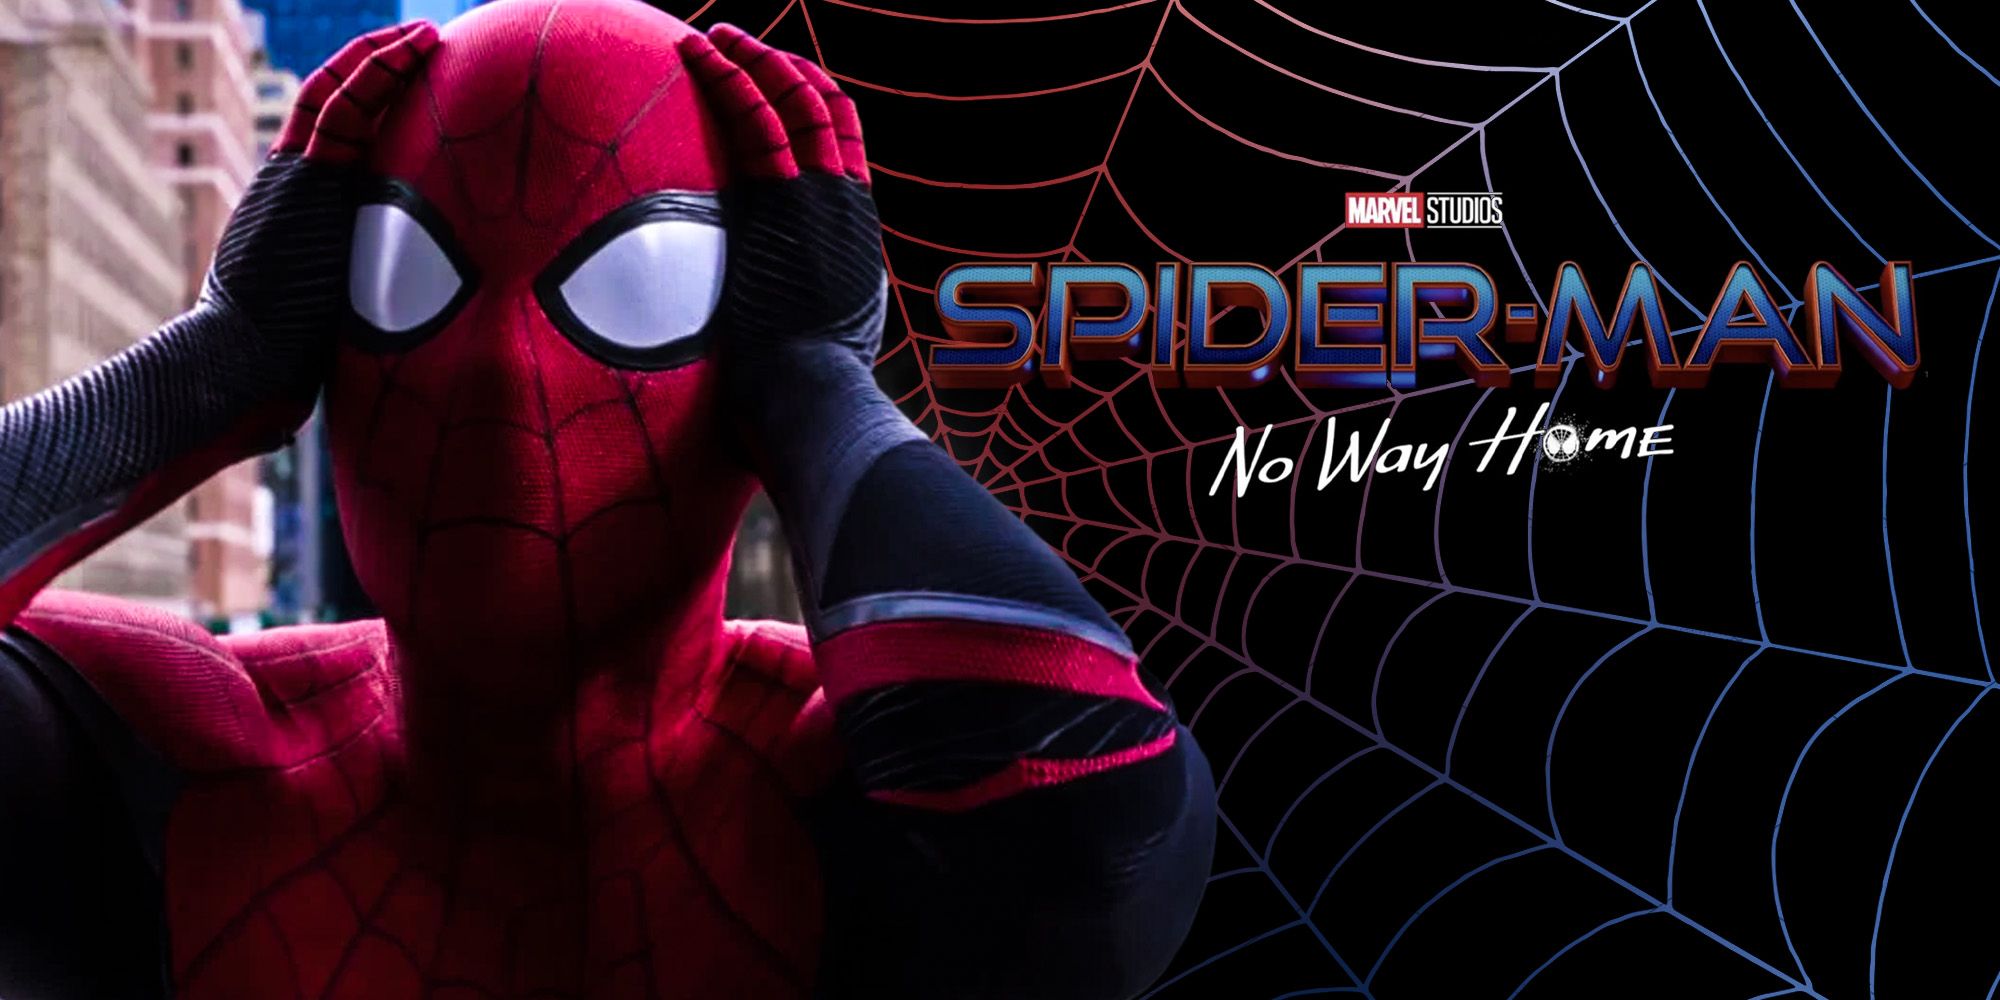 MCU Spider-Man 3 Title Explained: What No Way Home Means